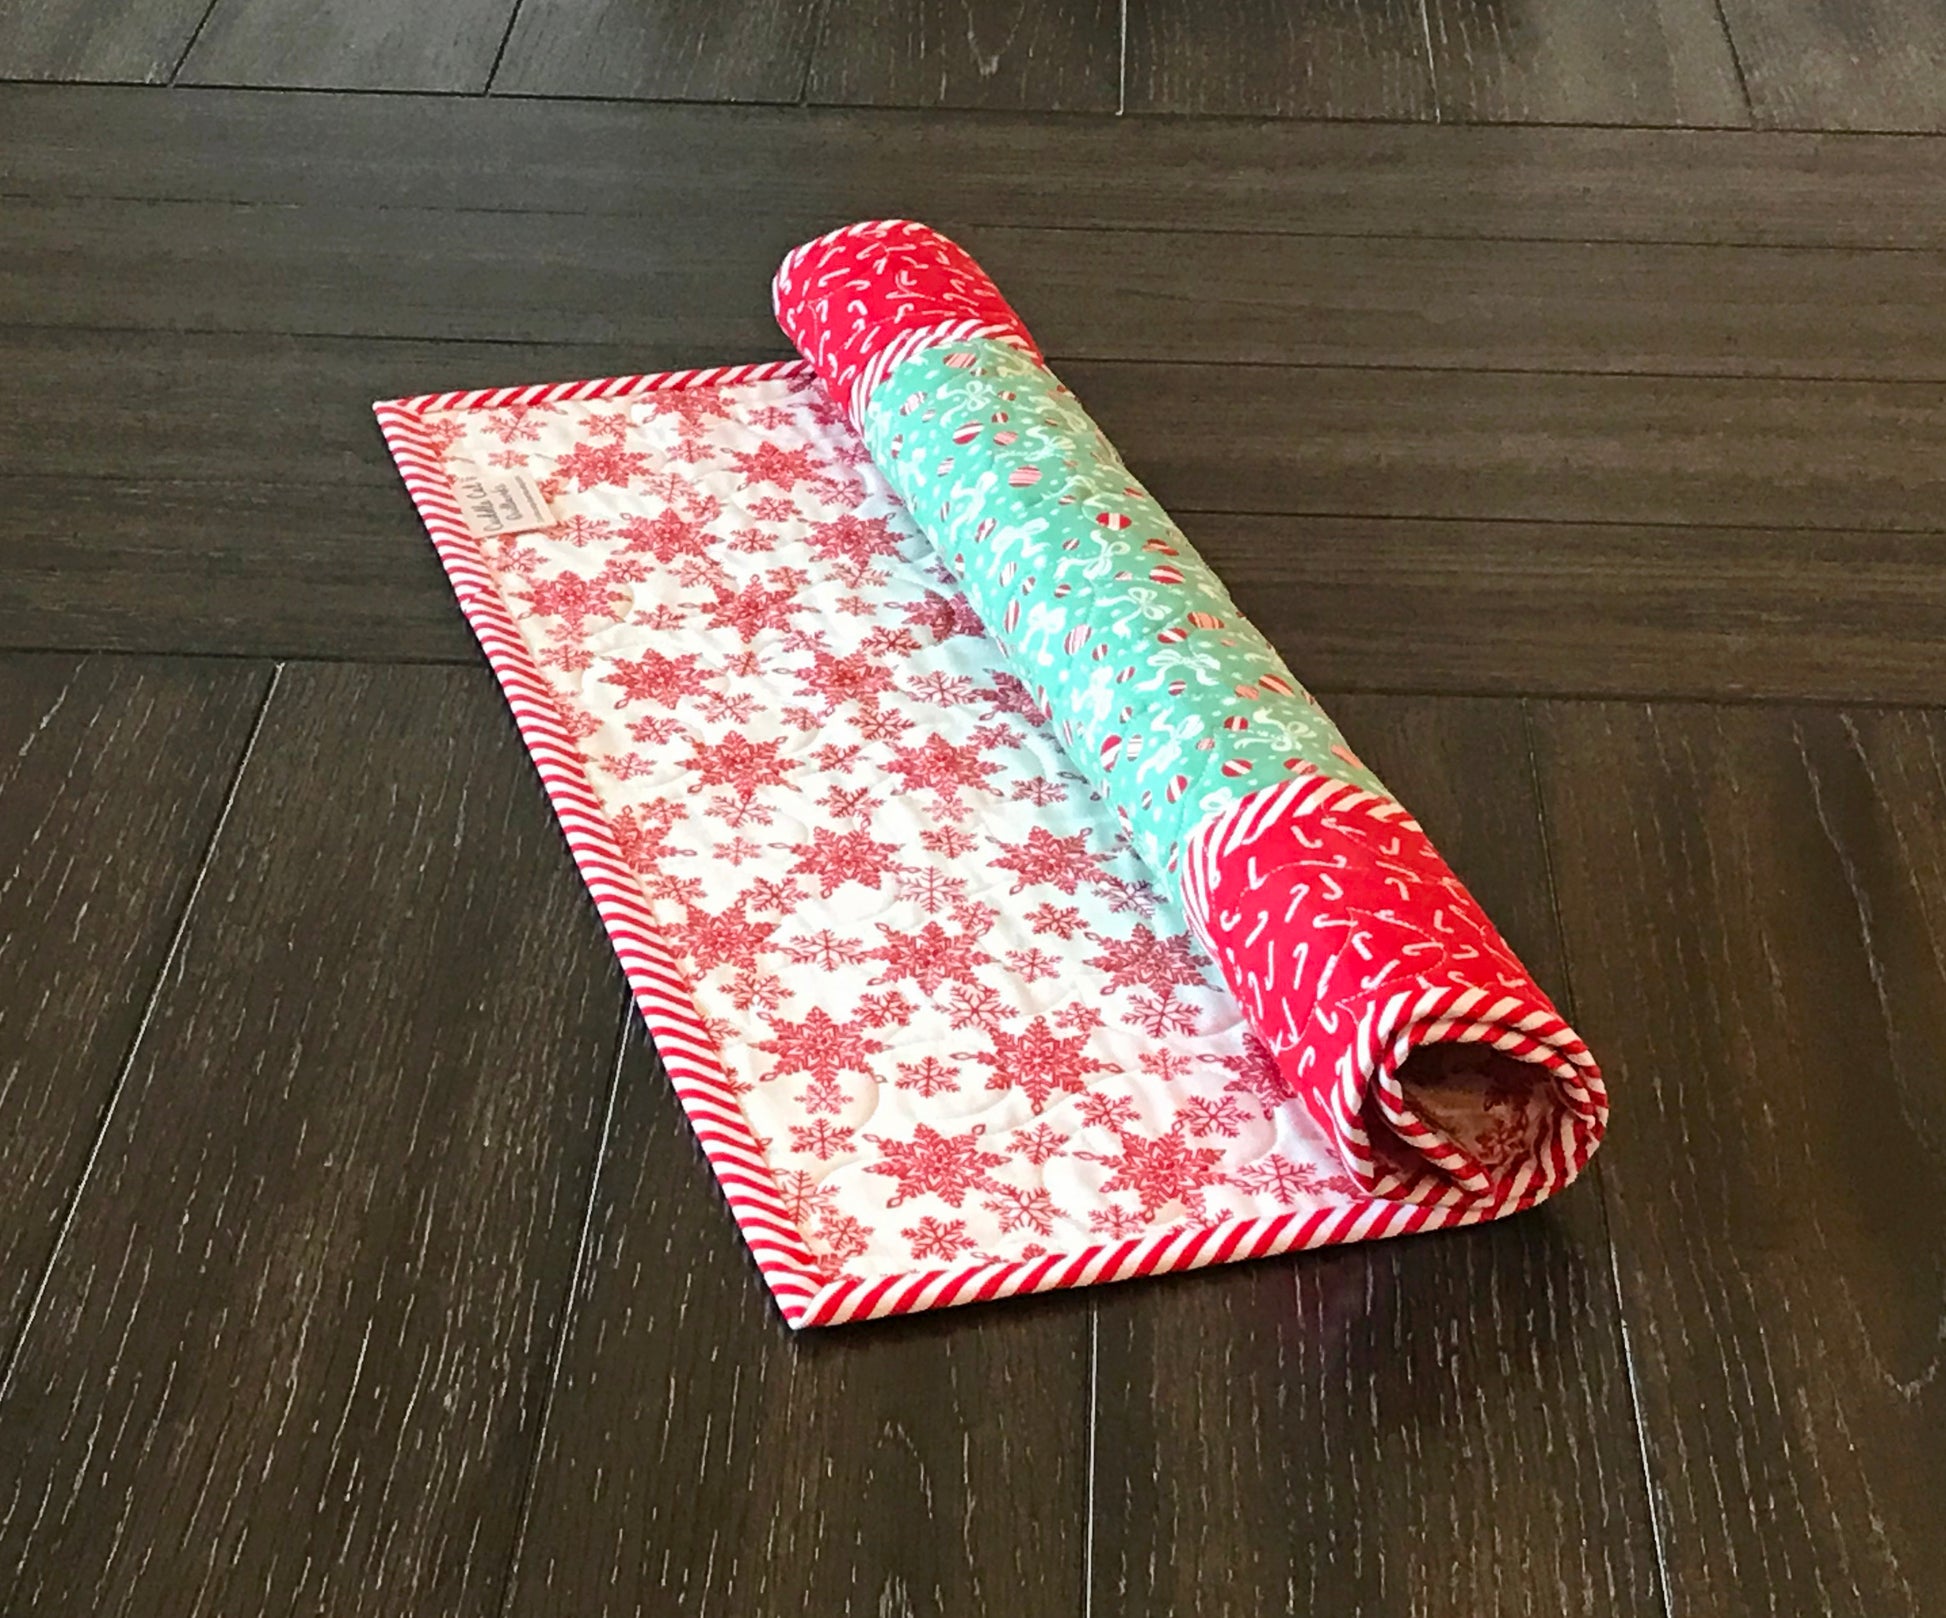 Red and Green Candy Cane Christmas Table Topper with Peppermint Striped Border 20.5" X 20.5" - Handmade Quilts, Digital Patterns, and Home Décor items online - Cuddle Cat Quiltworks